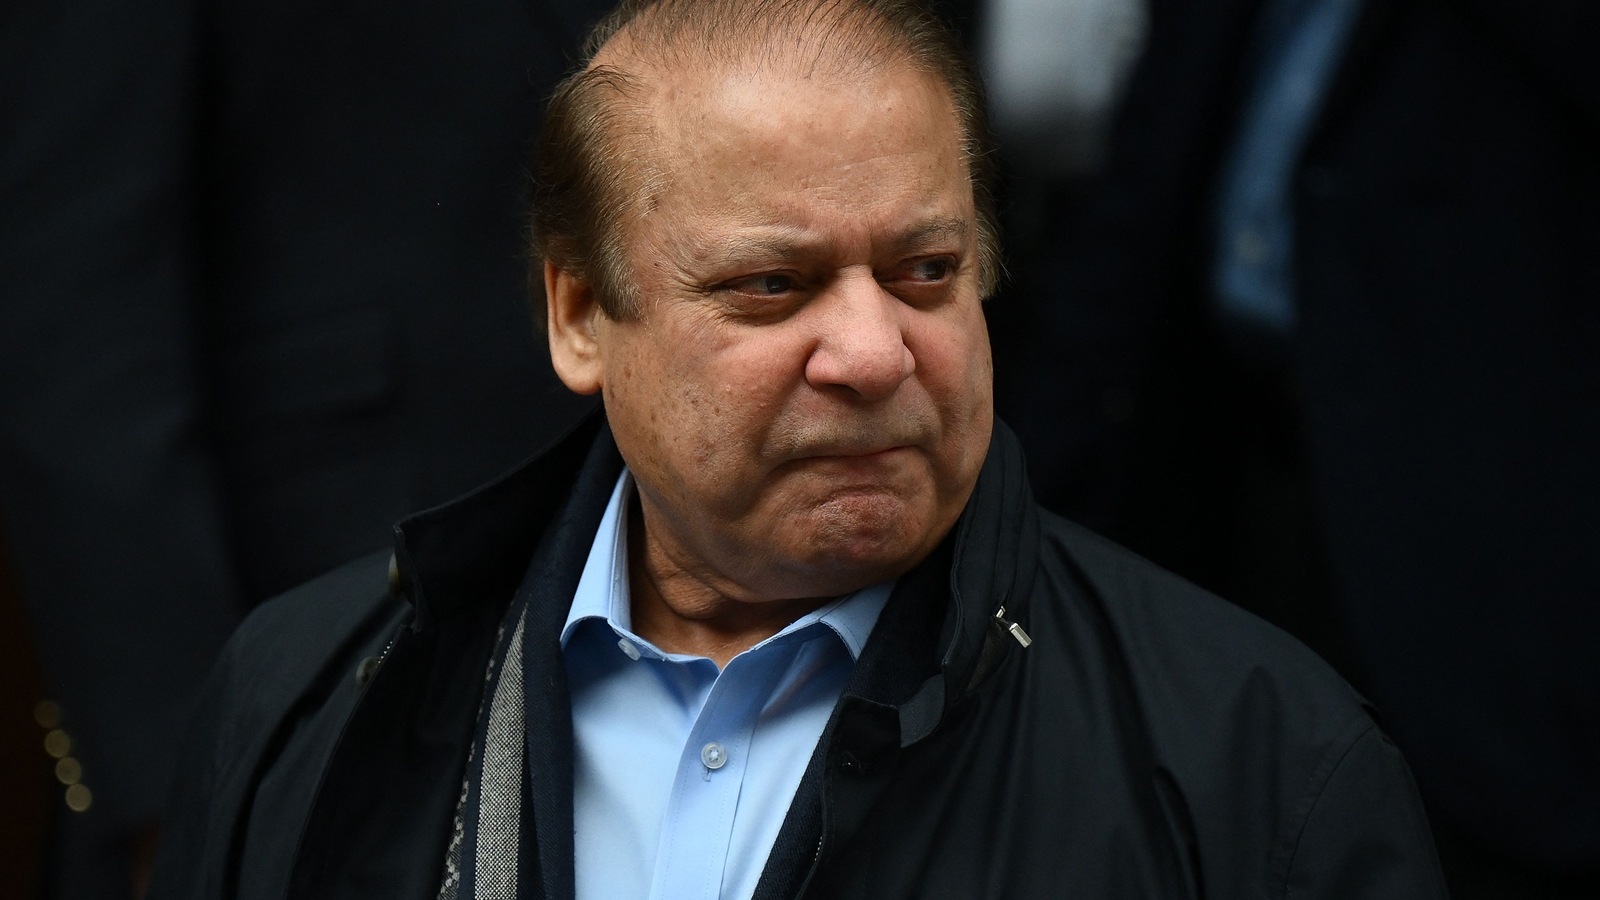 ex-pak-pm-nawaz-sharif-s-aide-attacked-beaten-up-in-london-report